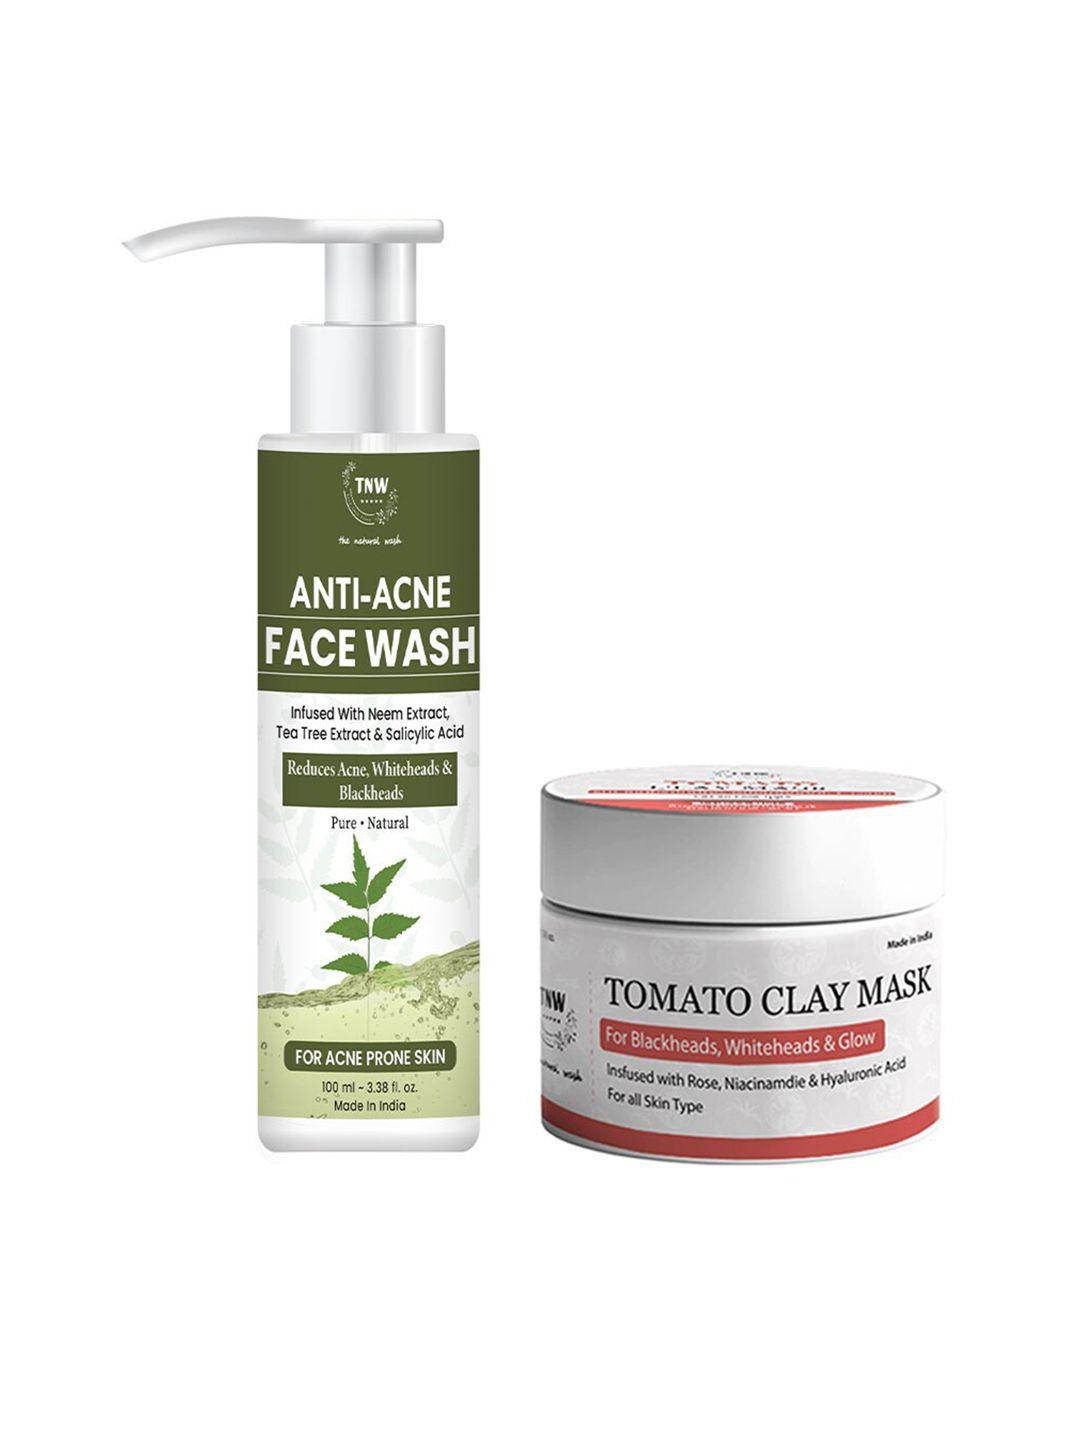 tnw the natural wash set of tomato clay mask & anti acne face wash